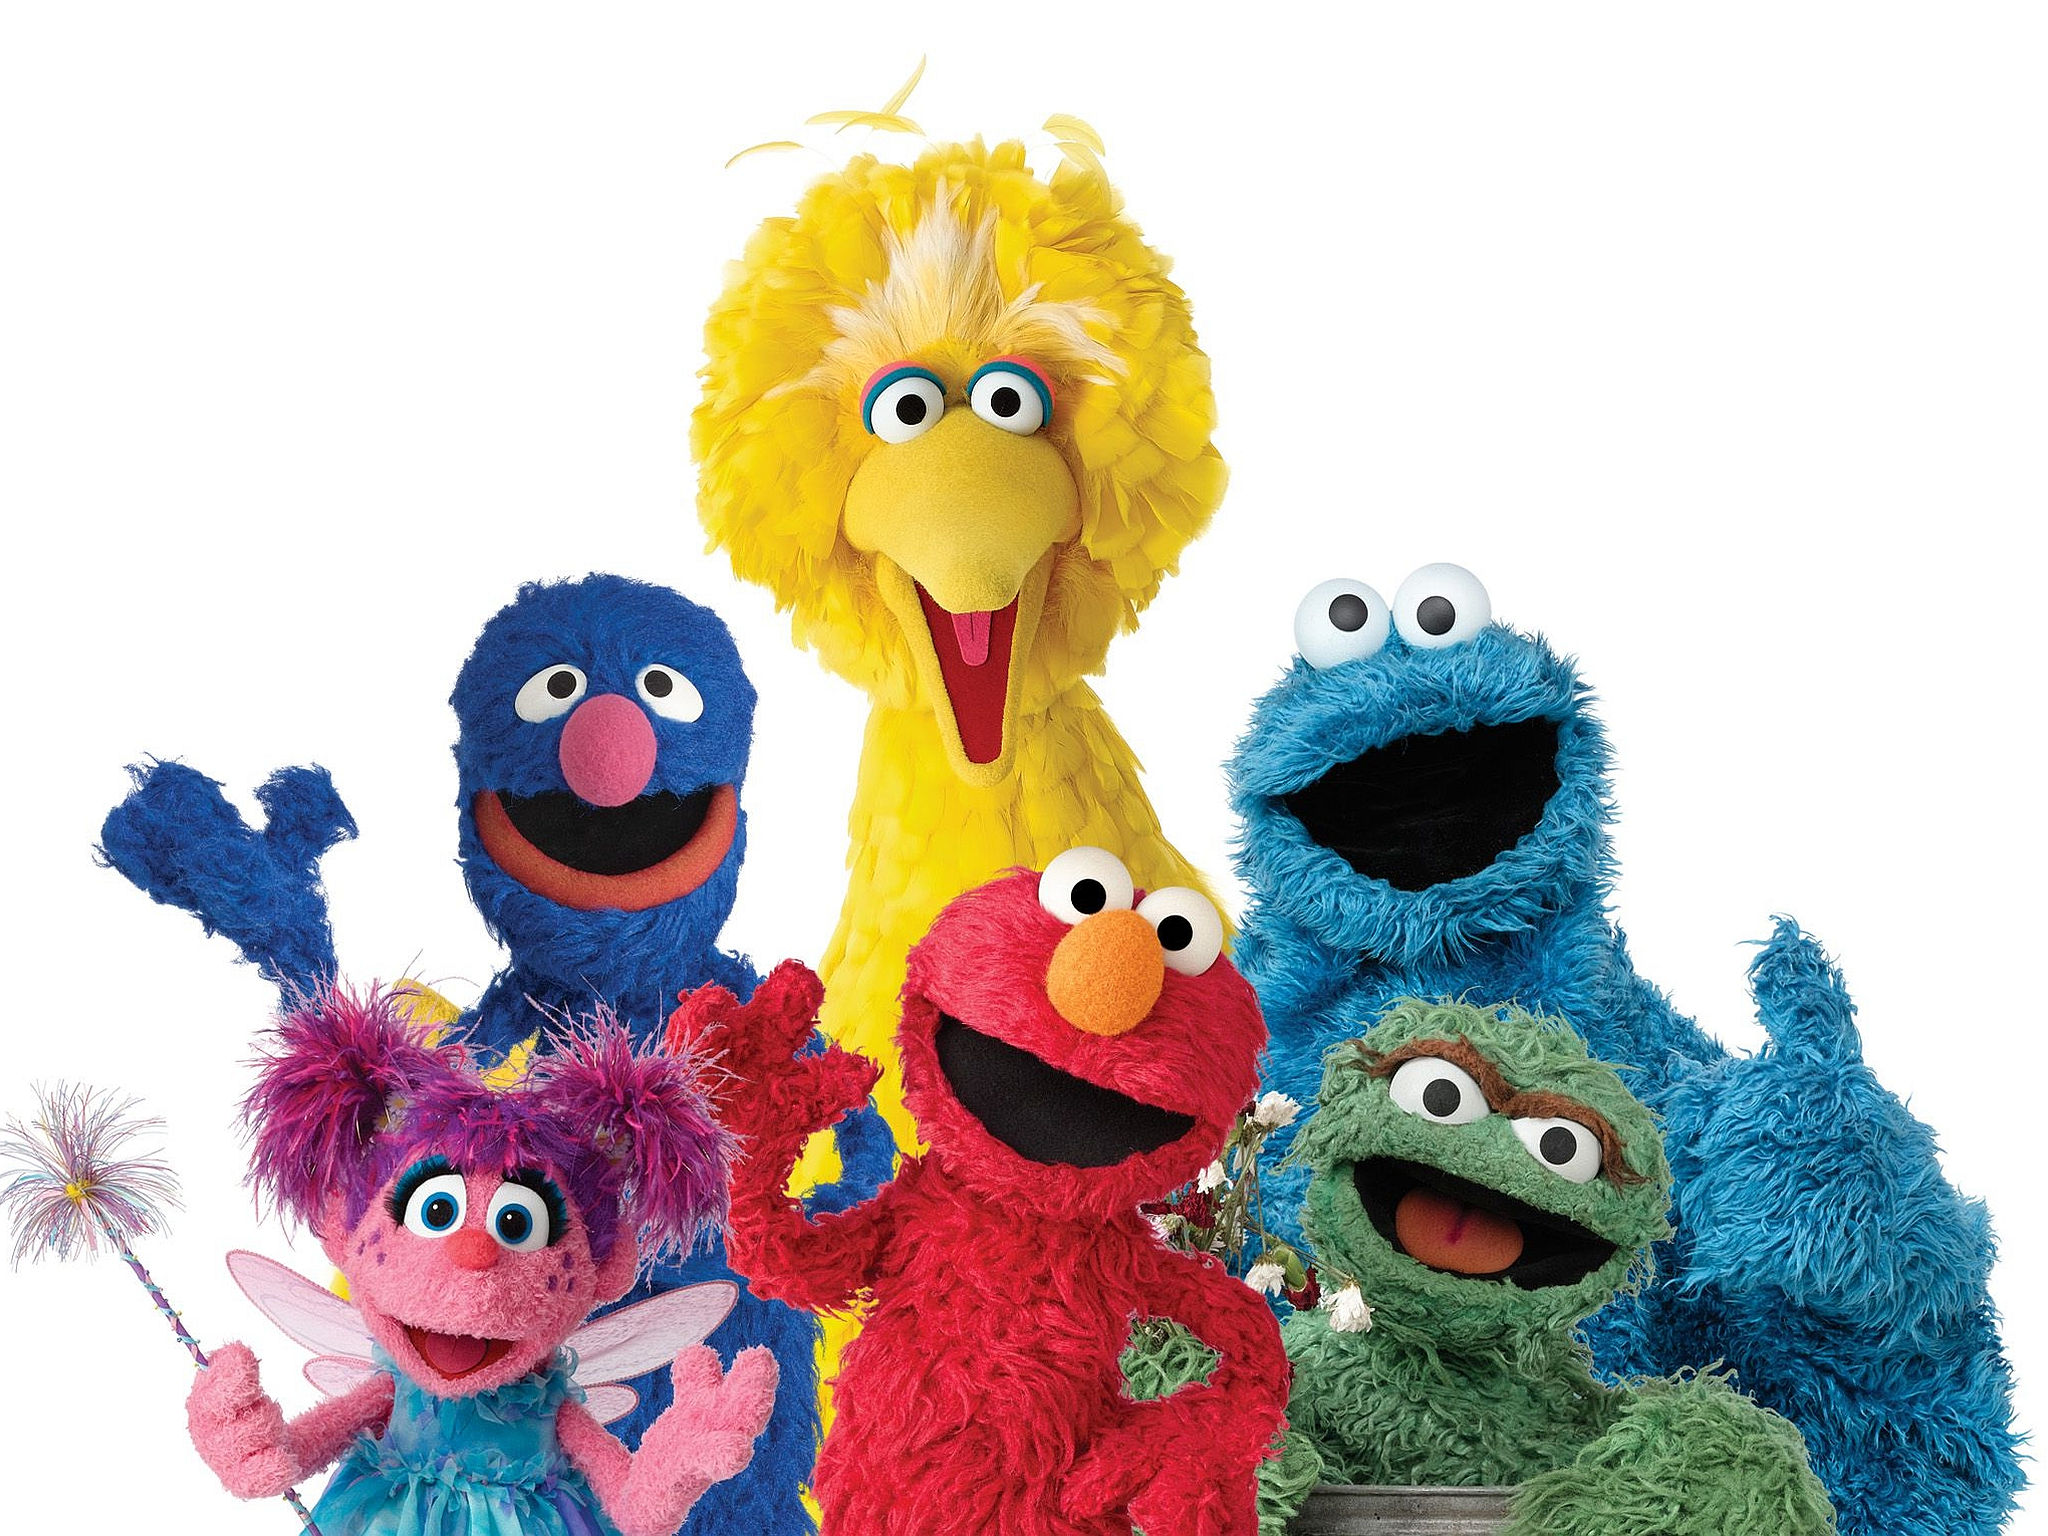 Sesame Street Characters Png - Doubletoasted Pluspng.com, Transparent background PNG HD thumbnail